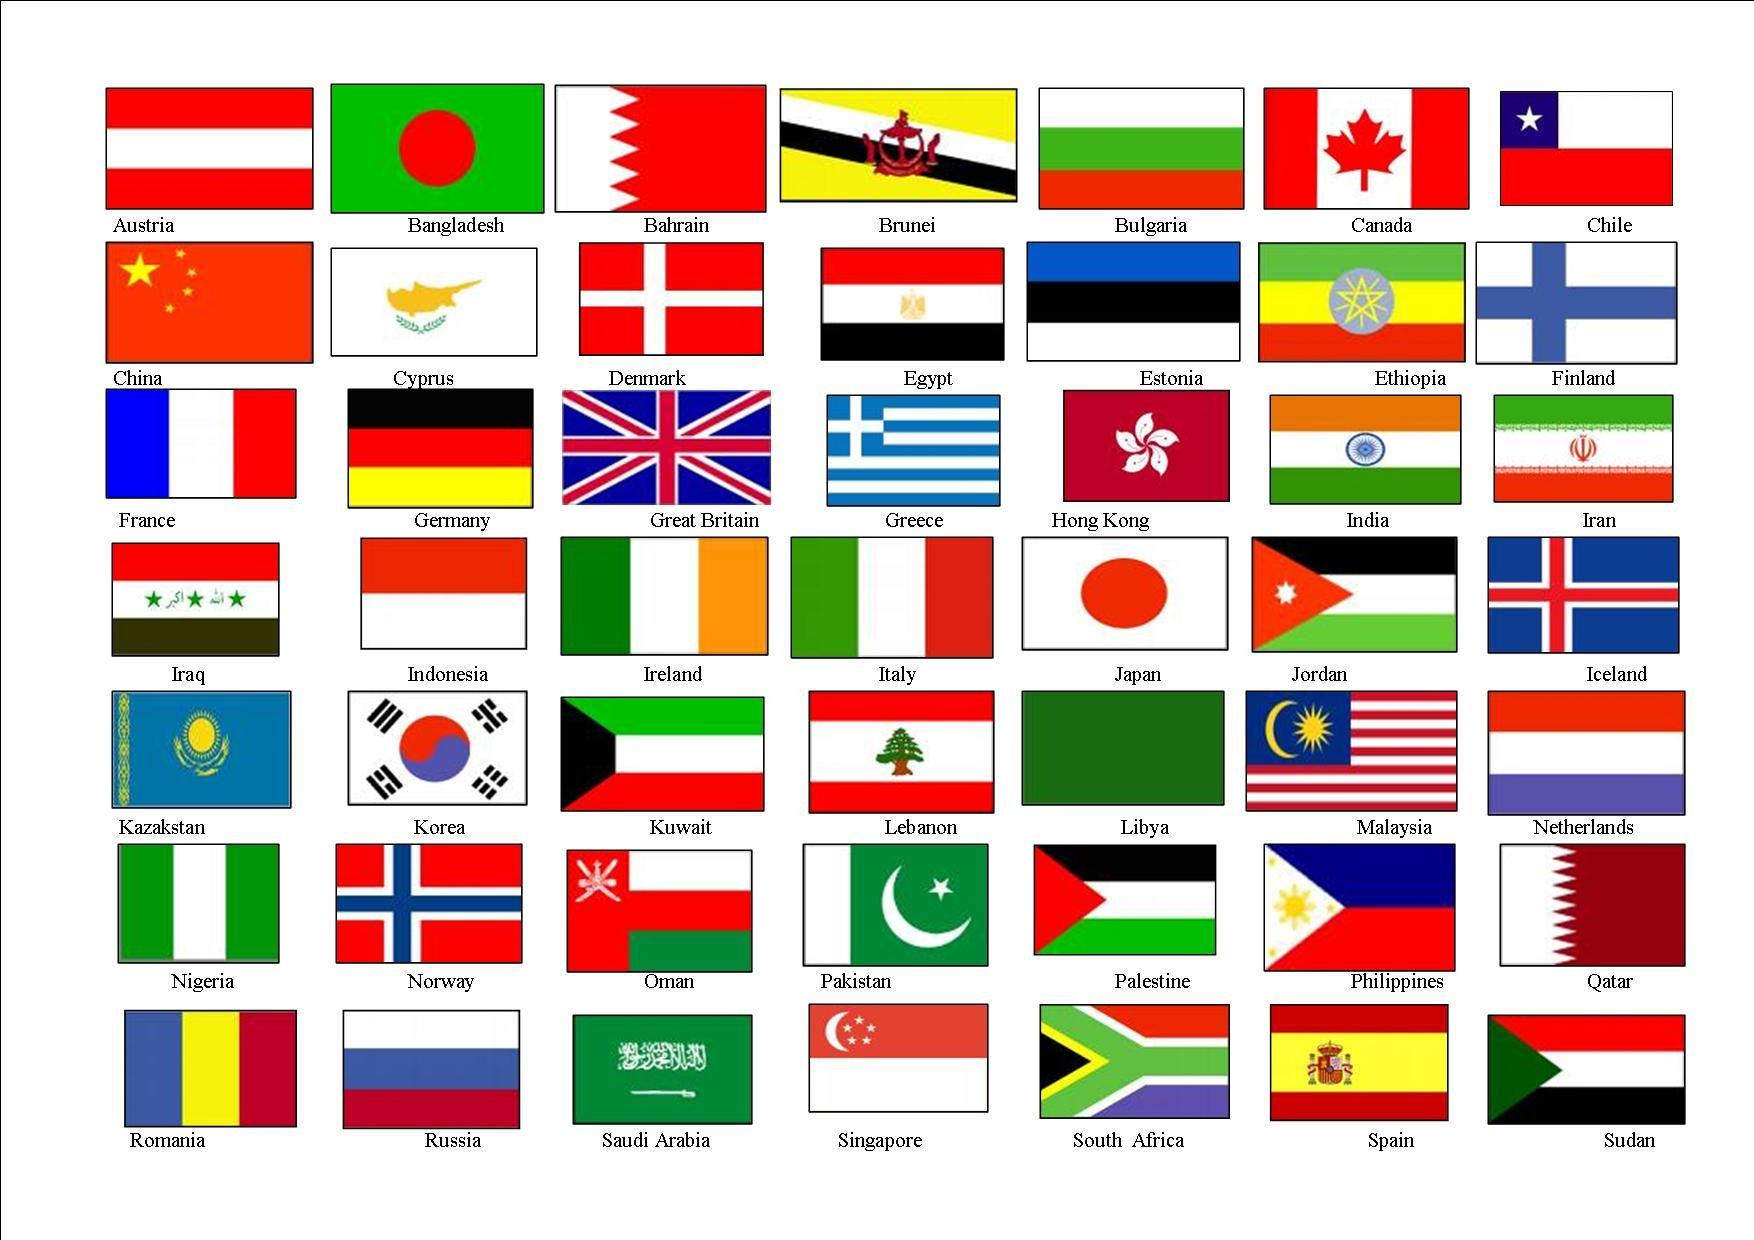 Flags of the World with Names. World Flags With Names 12096 HD Wallpaper in Travel n World. World flags with names, Flags of the world, Flags with names